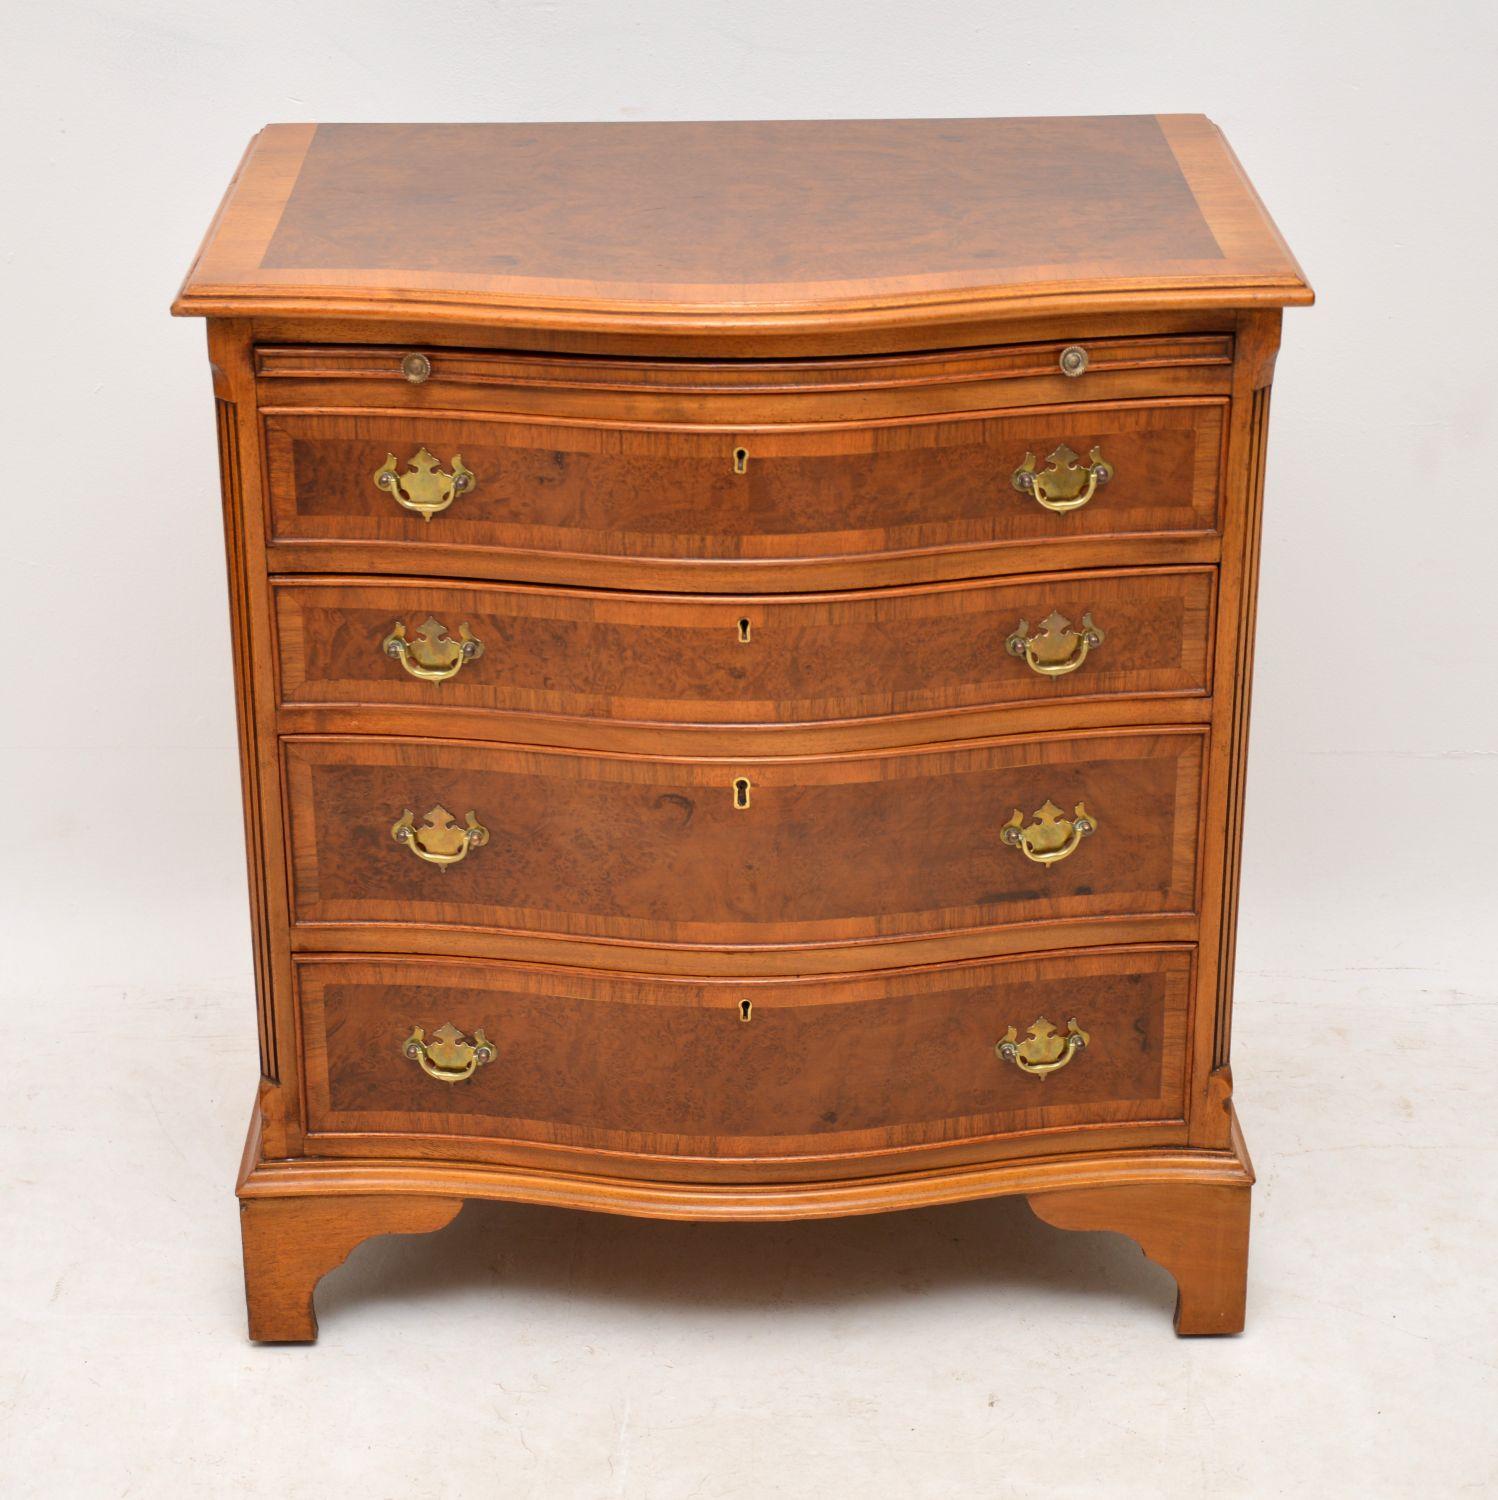 Fine quality antique George III style burr walnut chest of drawers with a serpentine shaped front and sitting on bracket feet. The top is crossbanded as are the drawers, which are graduated in depth, with locks and original brass handles. This chest